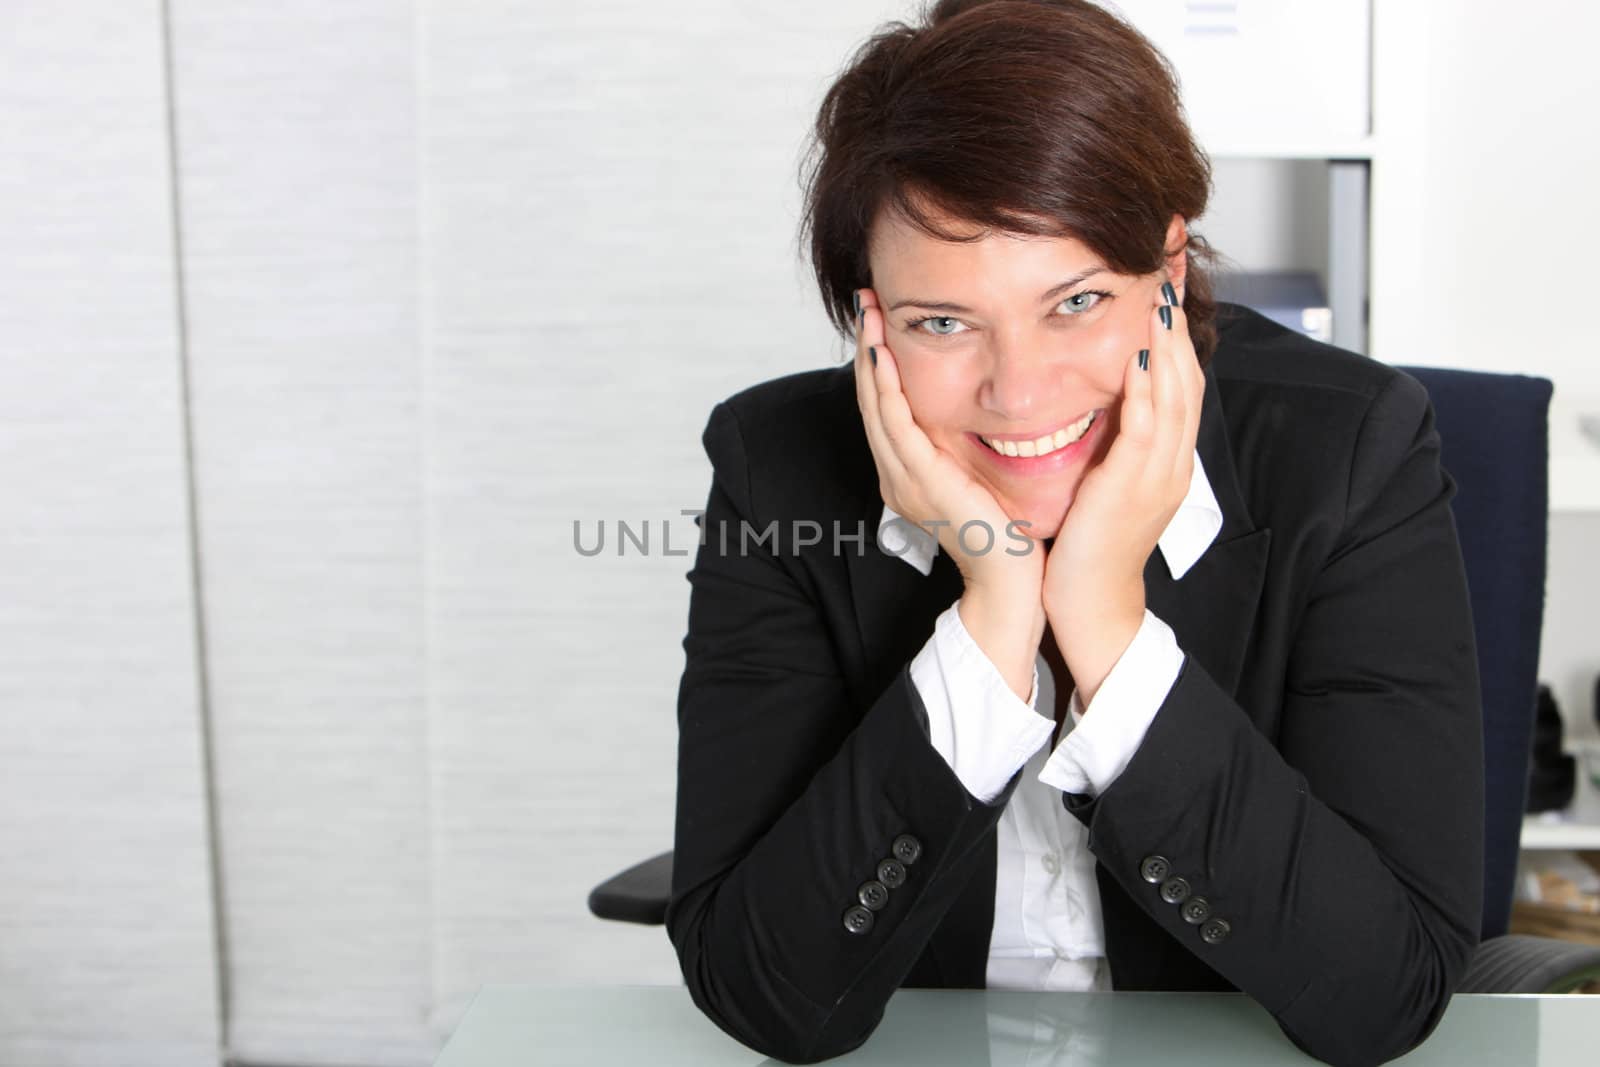 Smiling attractive business professional sitting at her desk with her chin resting in her cupped hands